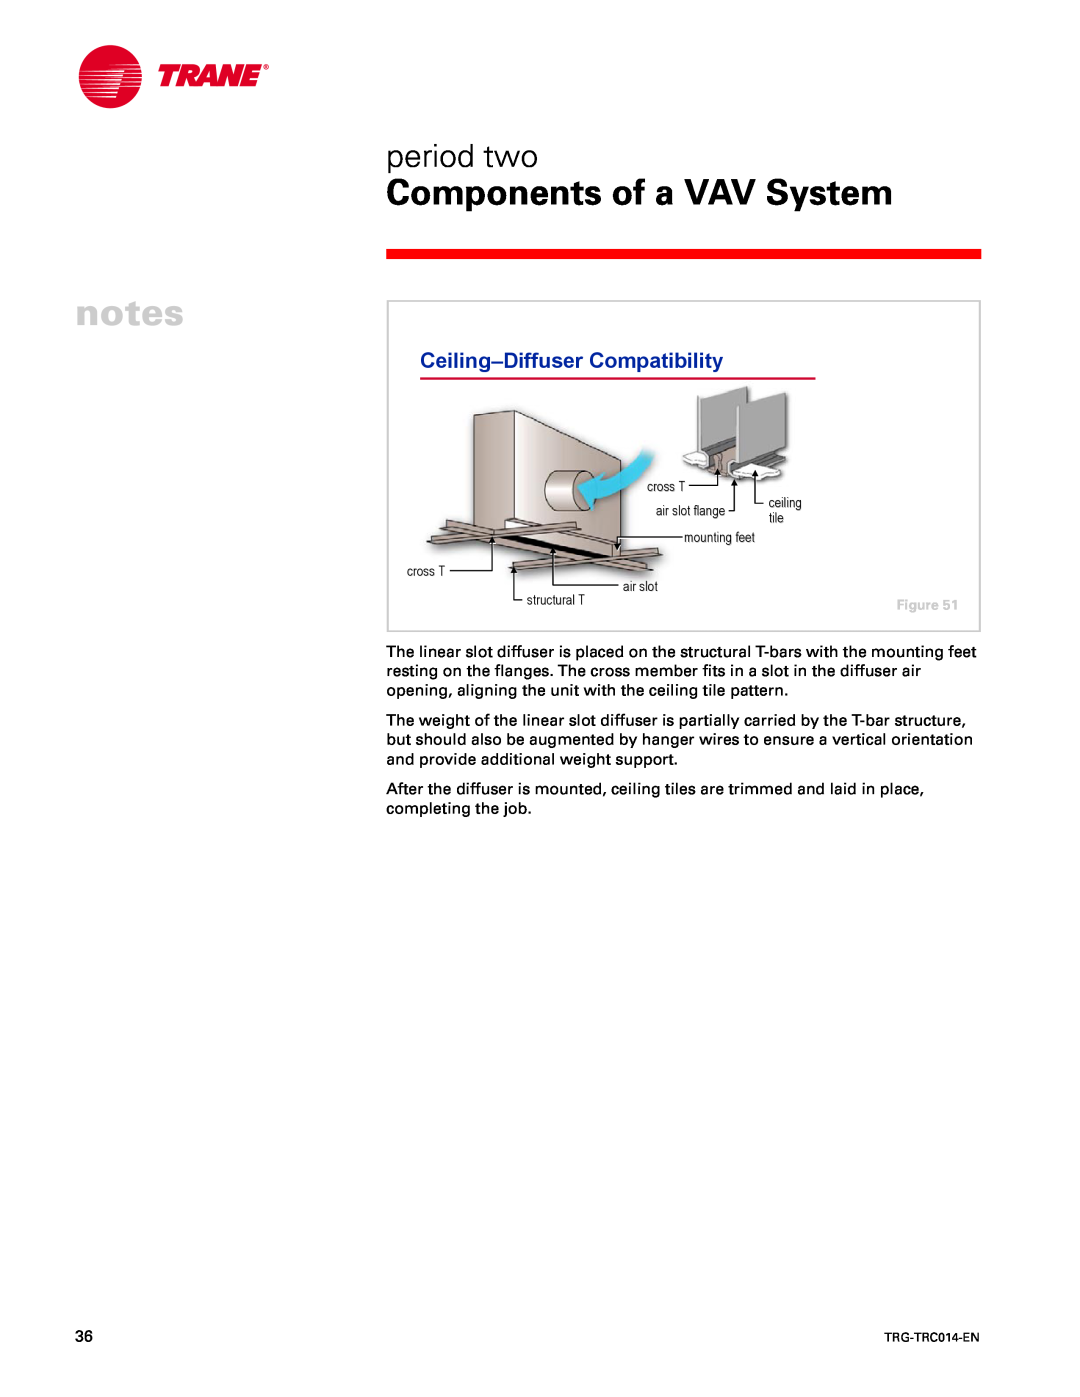 Trane TRG-TRC014-EN Components of a VAV System, period two, Ceiling-DiffuserCompatibility, cross T, air slot flange, tile 